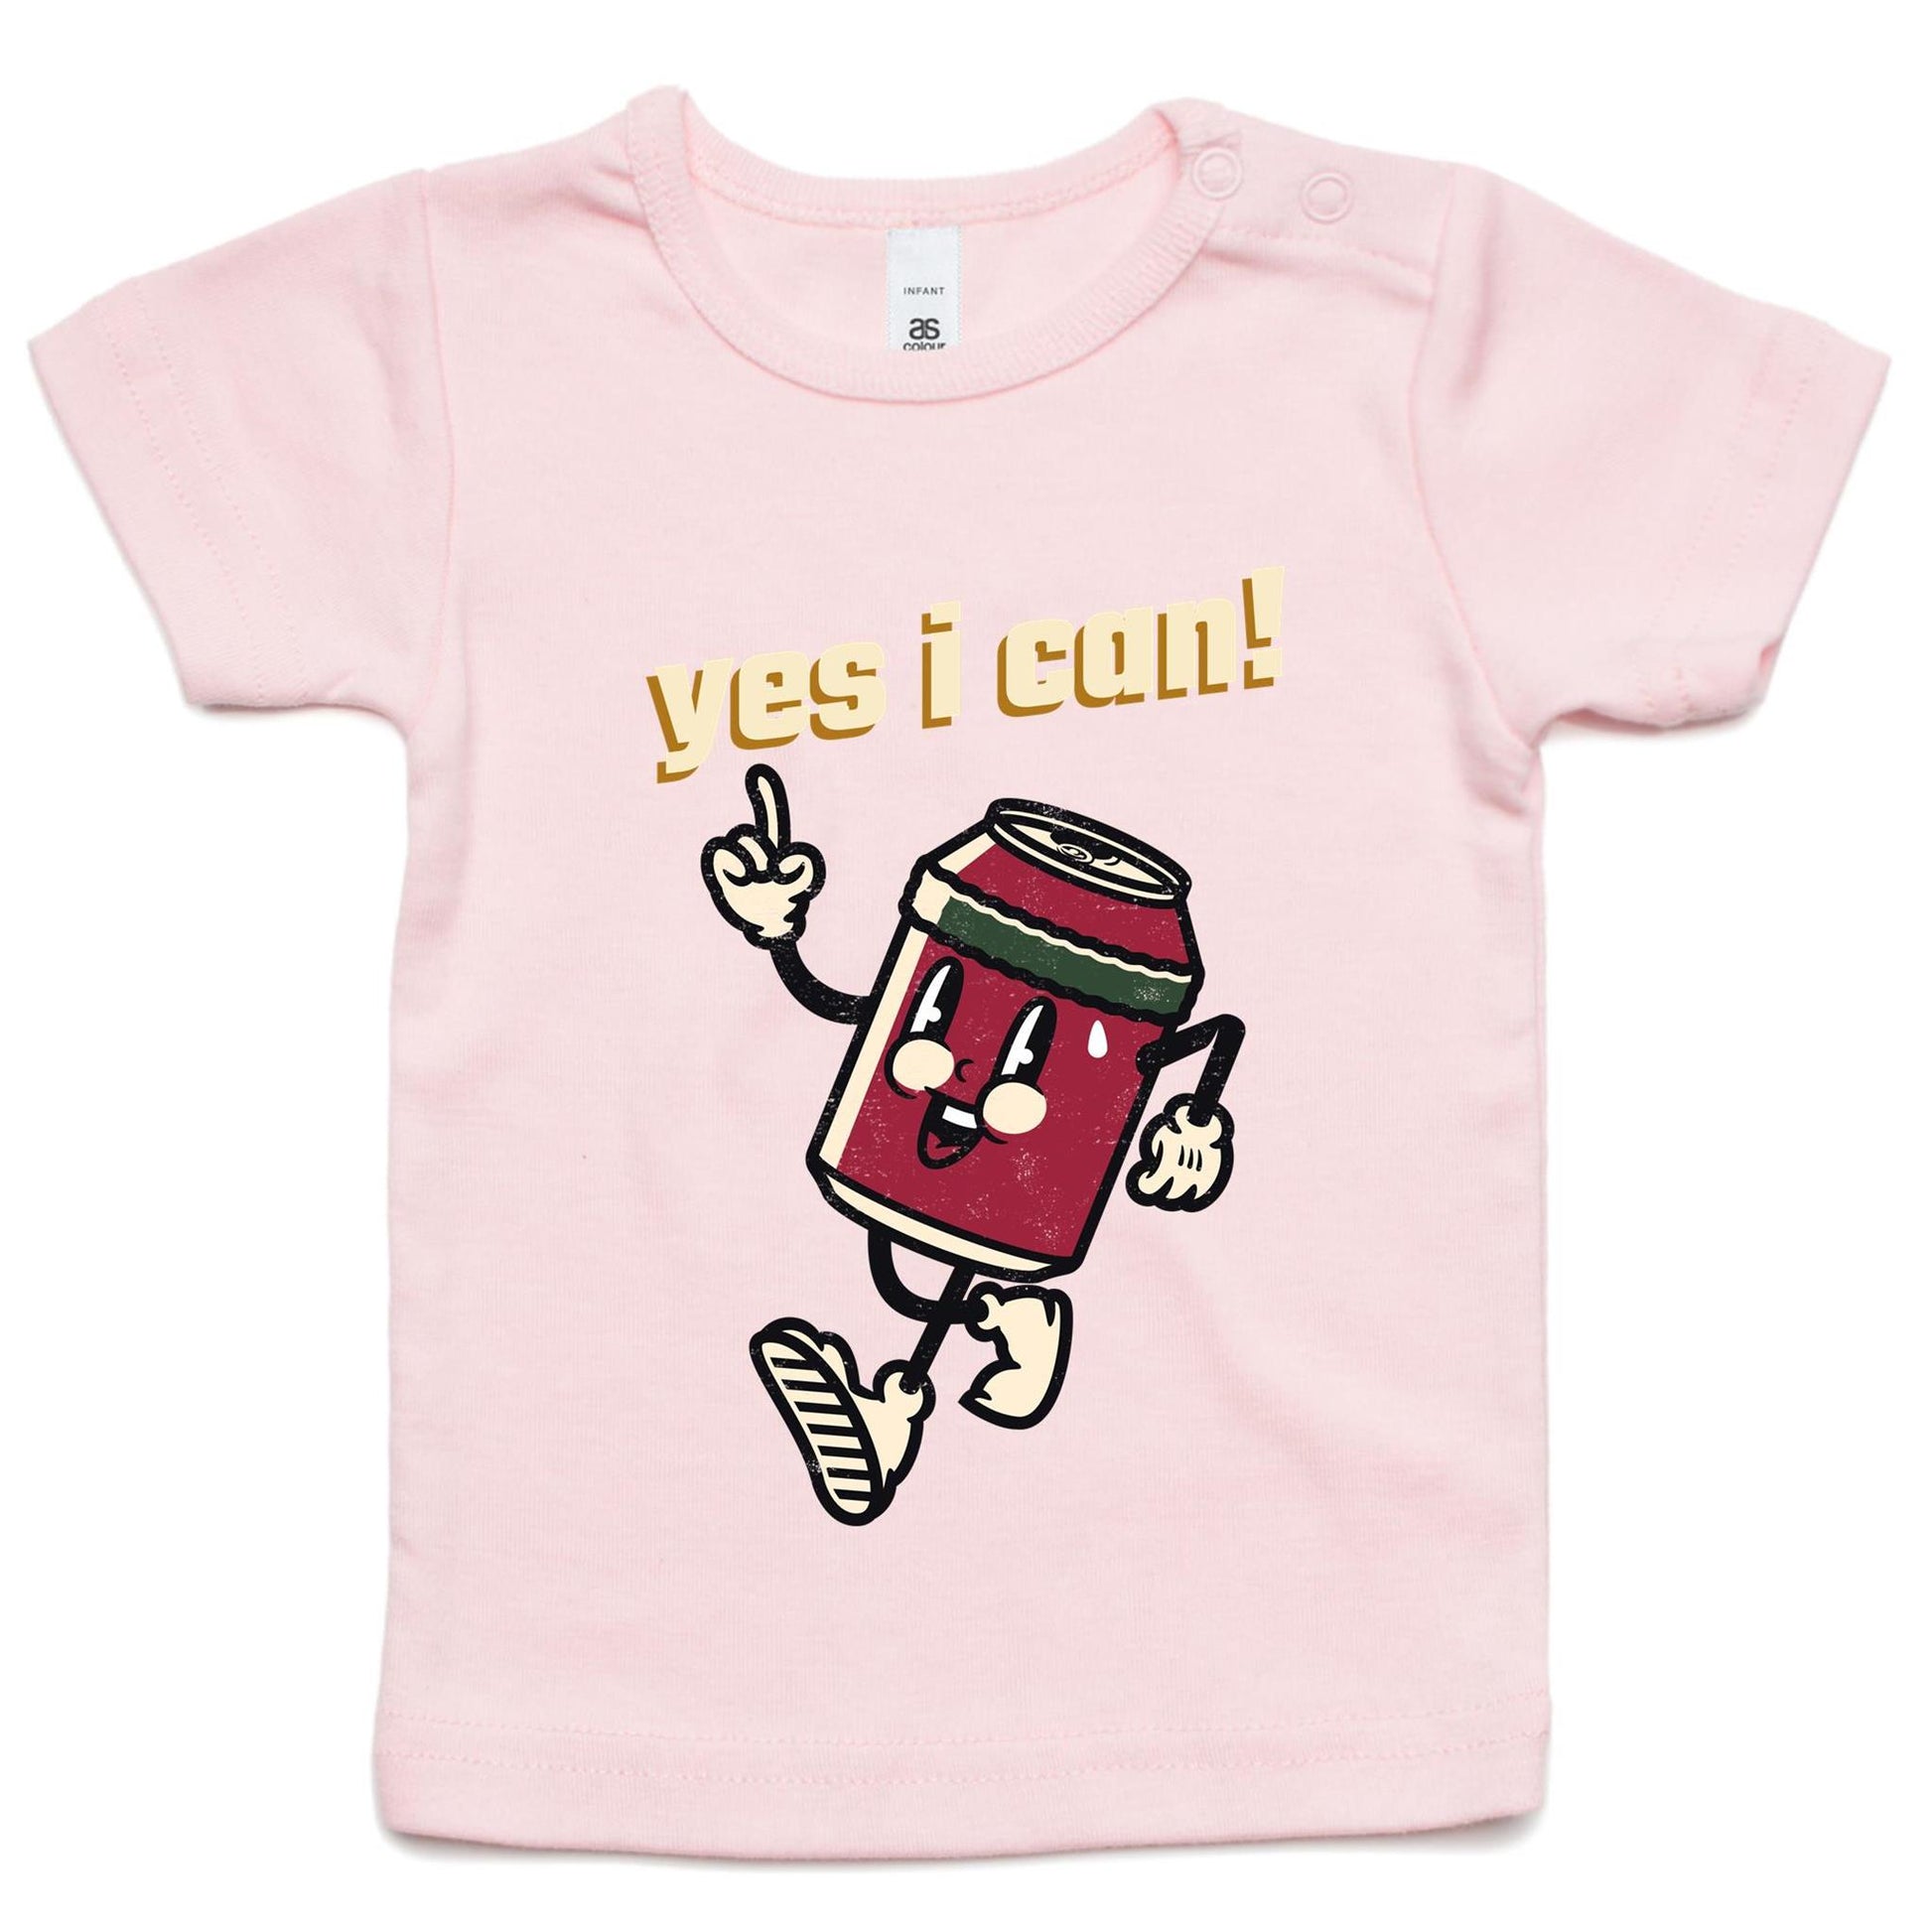 Yes I Can! - Baby T-shirt Pink Baby T-shirt Motivation Retro